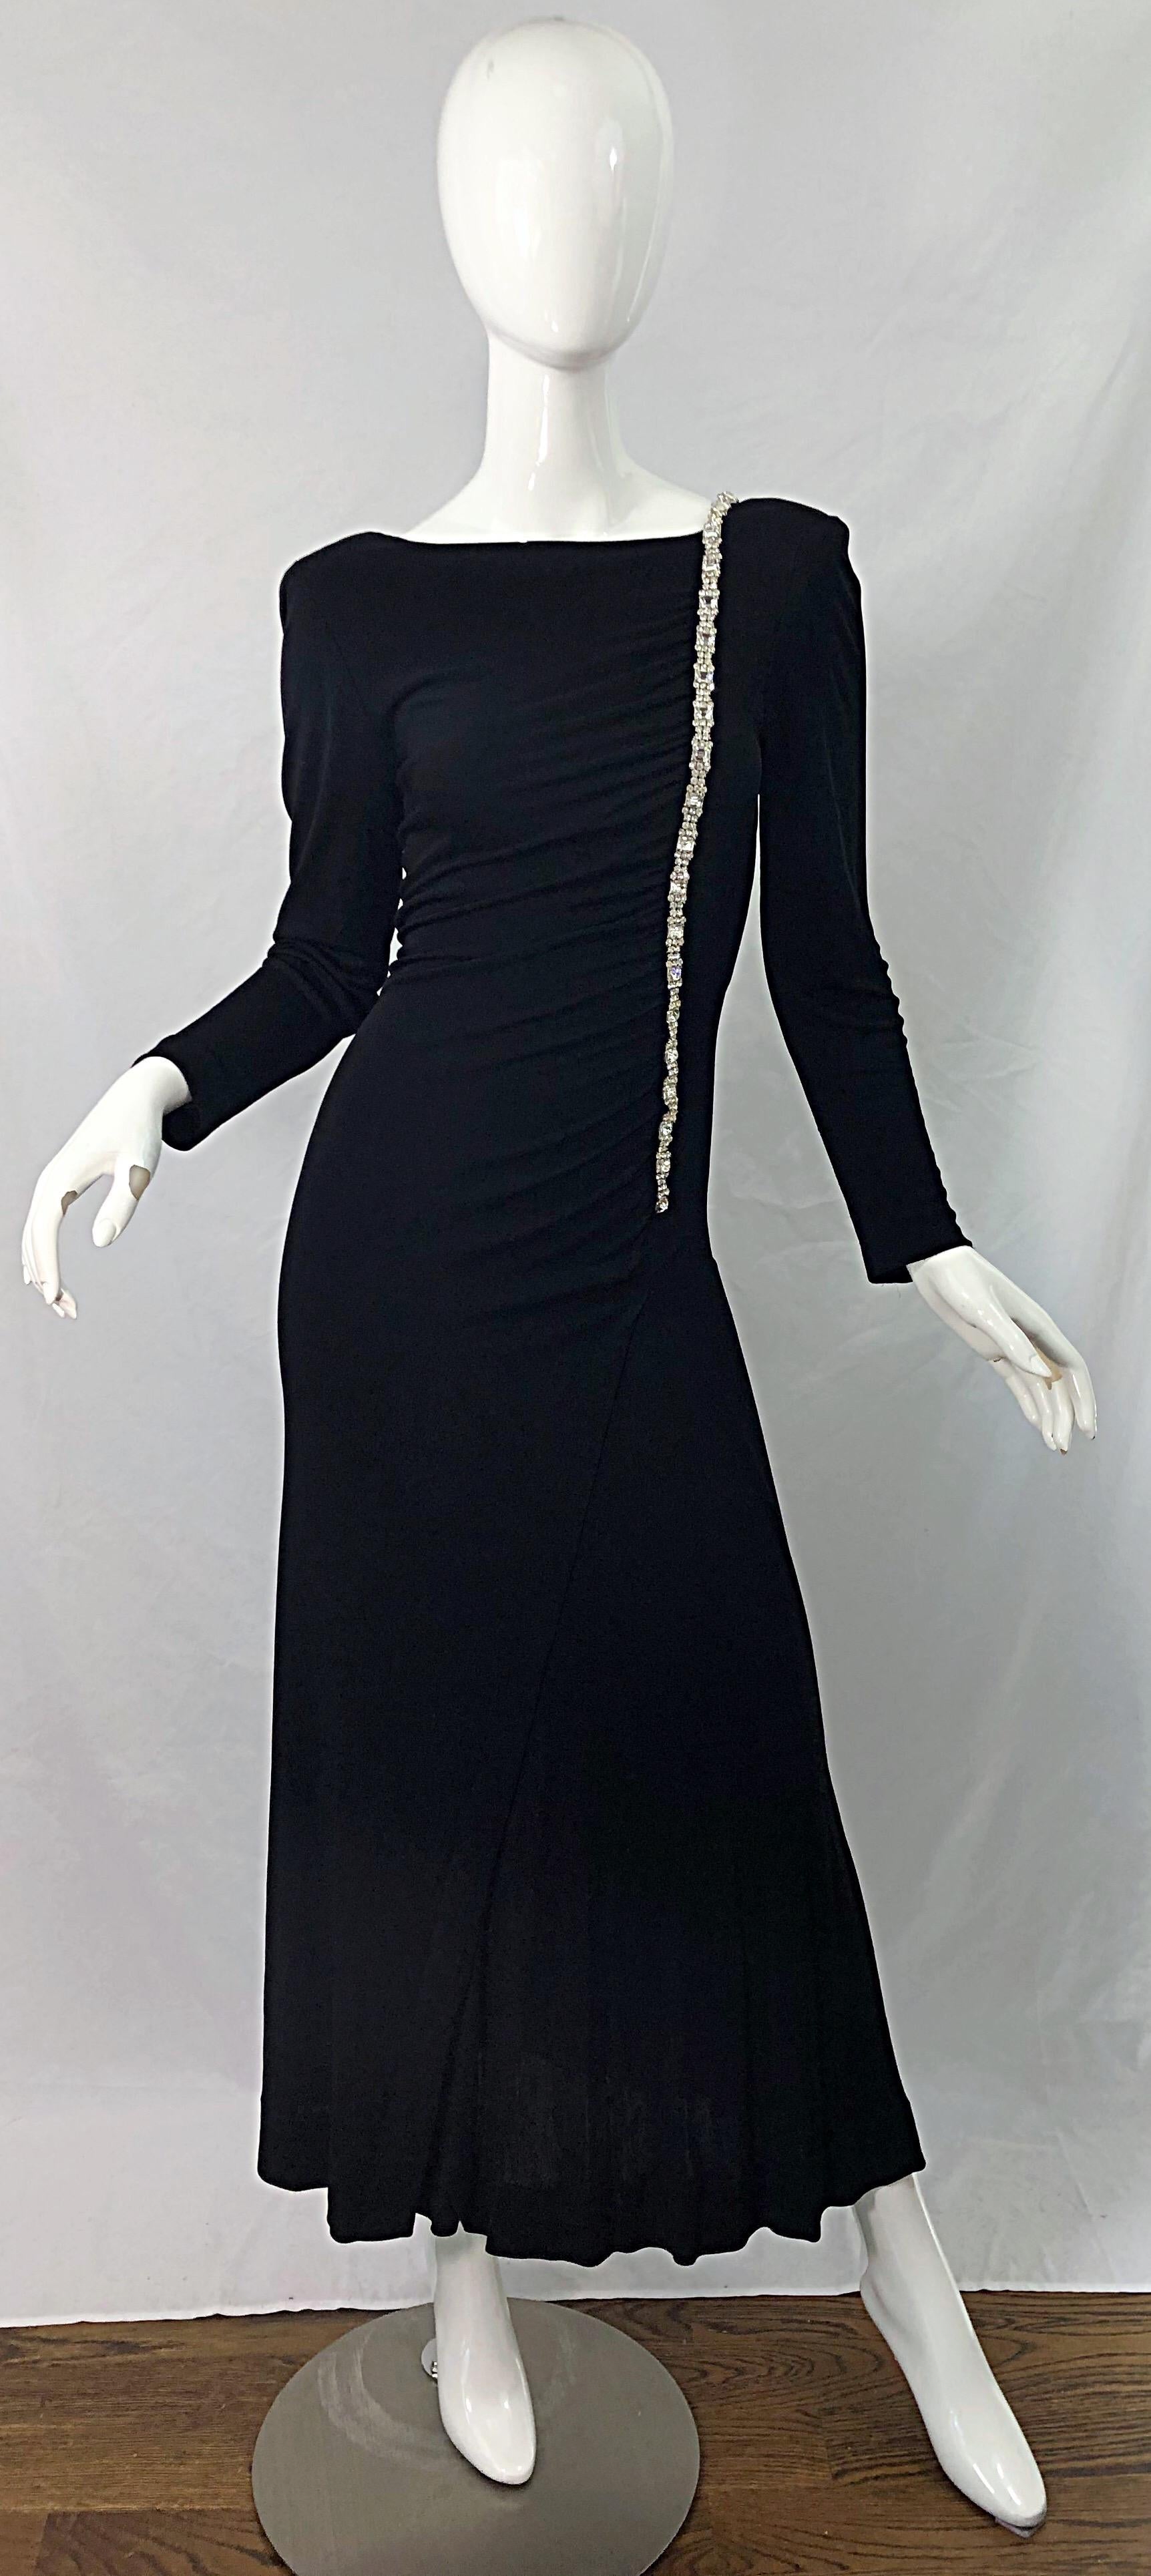 Beautiful and timeless WILLIAM TRAVILLA black matte silk jersey rhinestone encrusted long sleeve evening gown ! Features flattering ruching throughout the bodice. Interior shoulder pads add just the right amount of volume. Rhinestones hand-sewn